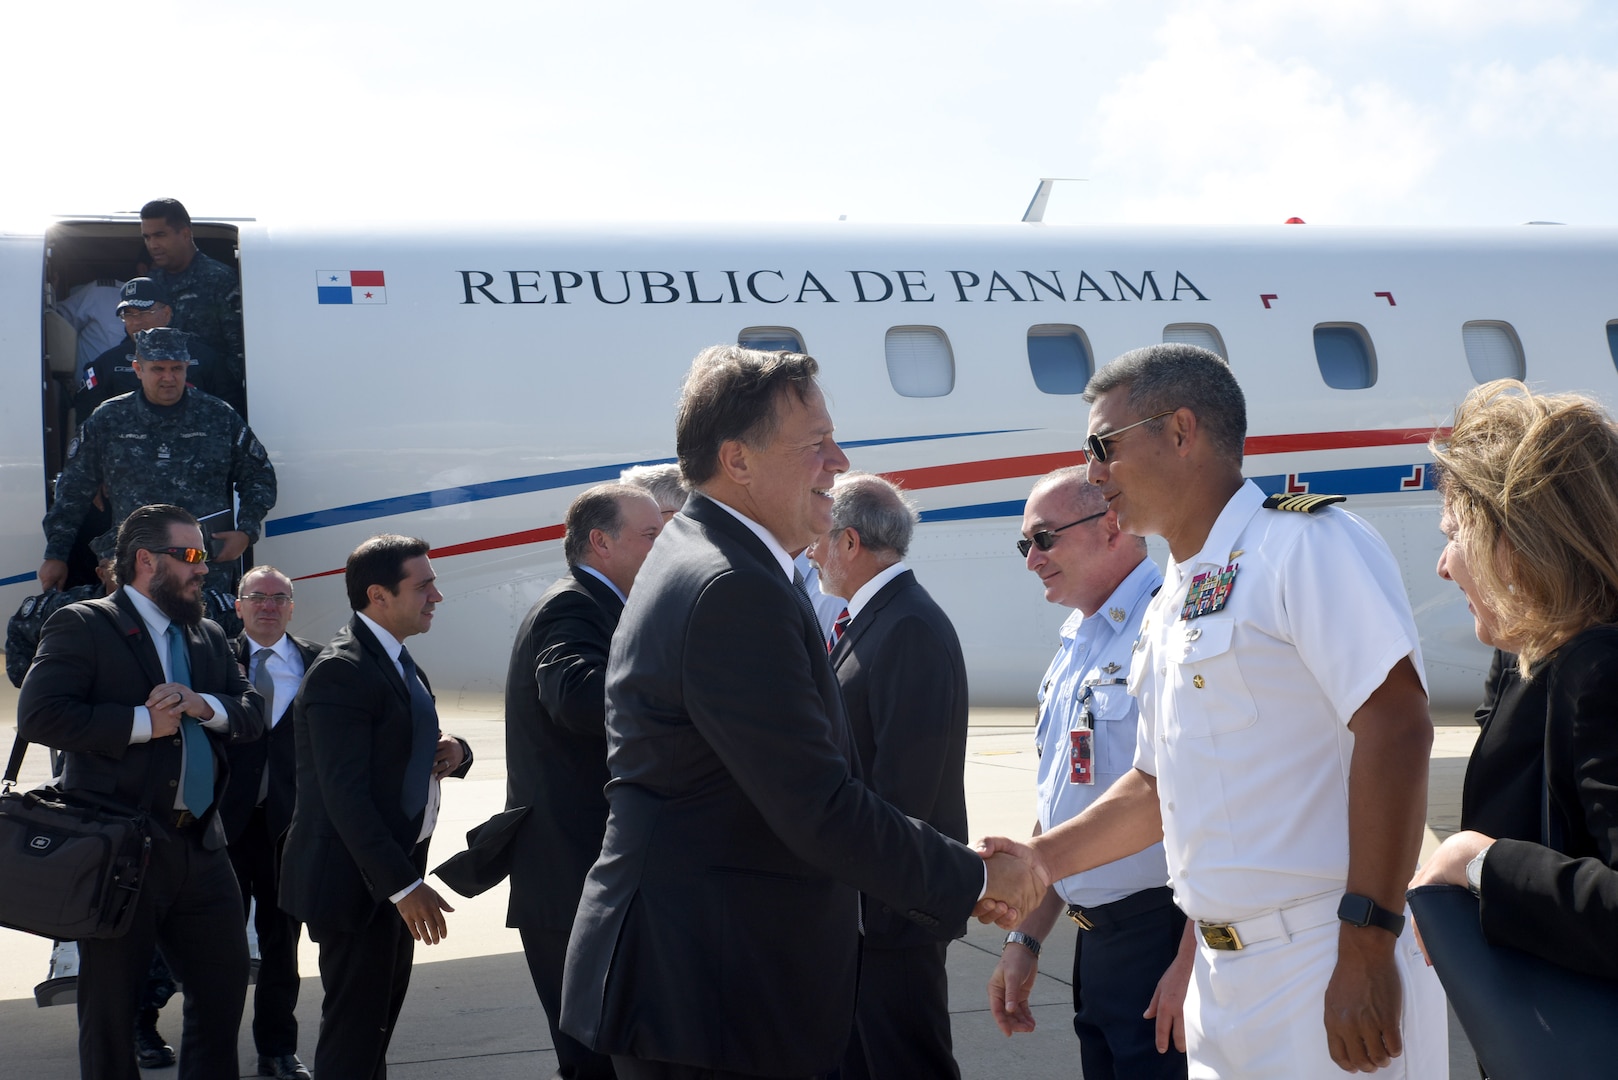 President of Panama Juan Carlos Varela and staff are welcomed to Naval Air Station Key West’s Boca Chica Field by NAS Key West Commanding Officer Capt. Bobby Baker.